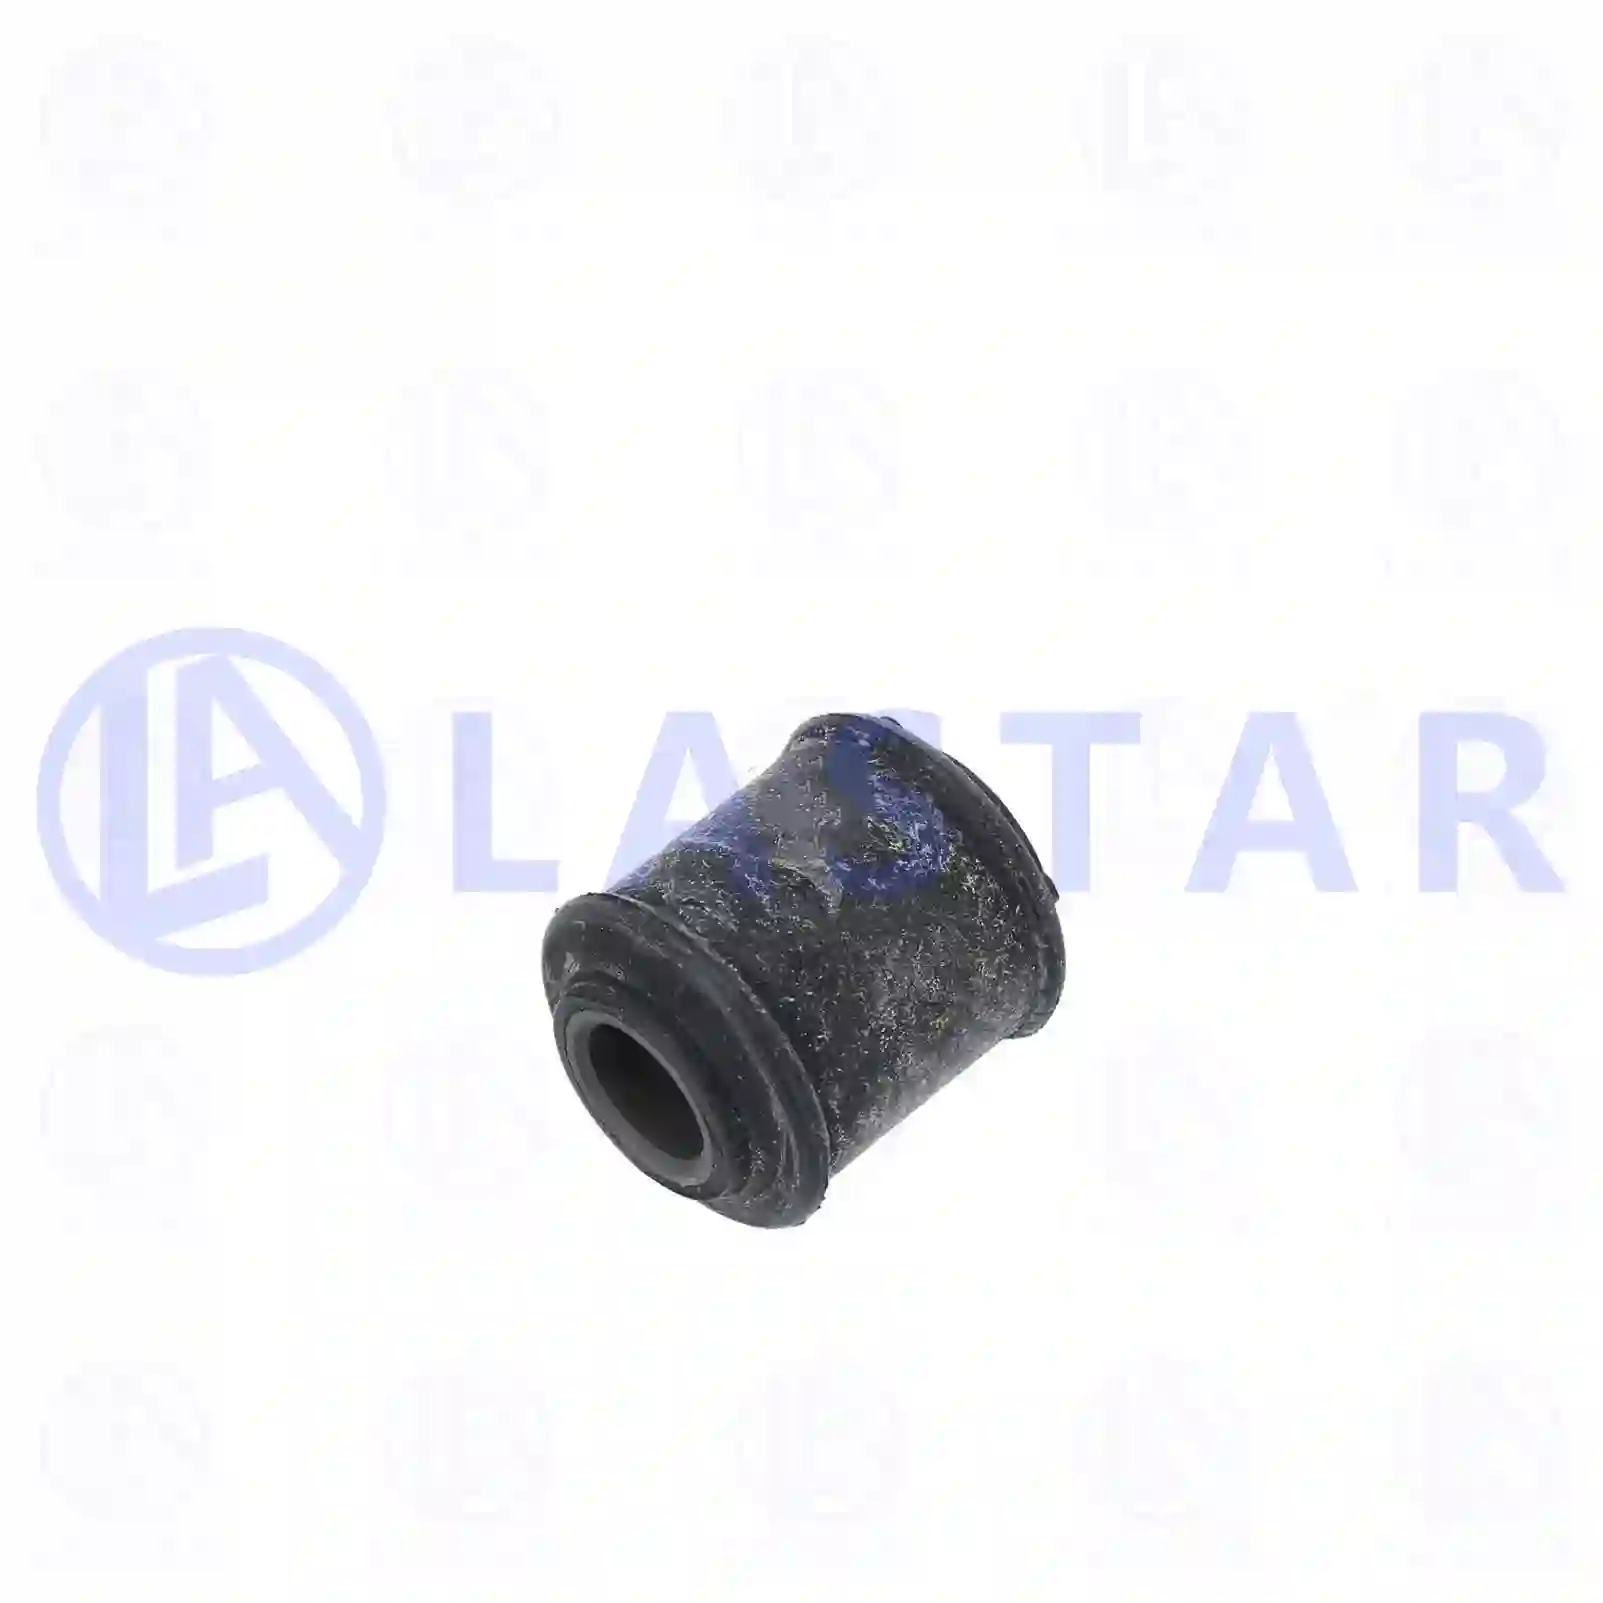 Rubber bushing, shock absorber, 77735070, 0008901401, , ||  77735070 Lastar Spare Part | Truck Spare Parts, Auotomotive Spare Parts Rubber bushing, shock absorber, 77735070, 0008901401, , ||  77735070 Lastar Spare Part | Truck Spare Parts, Auotomotive Spare Parts